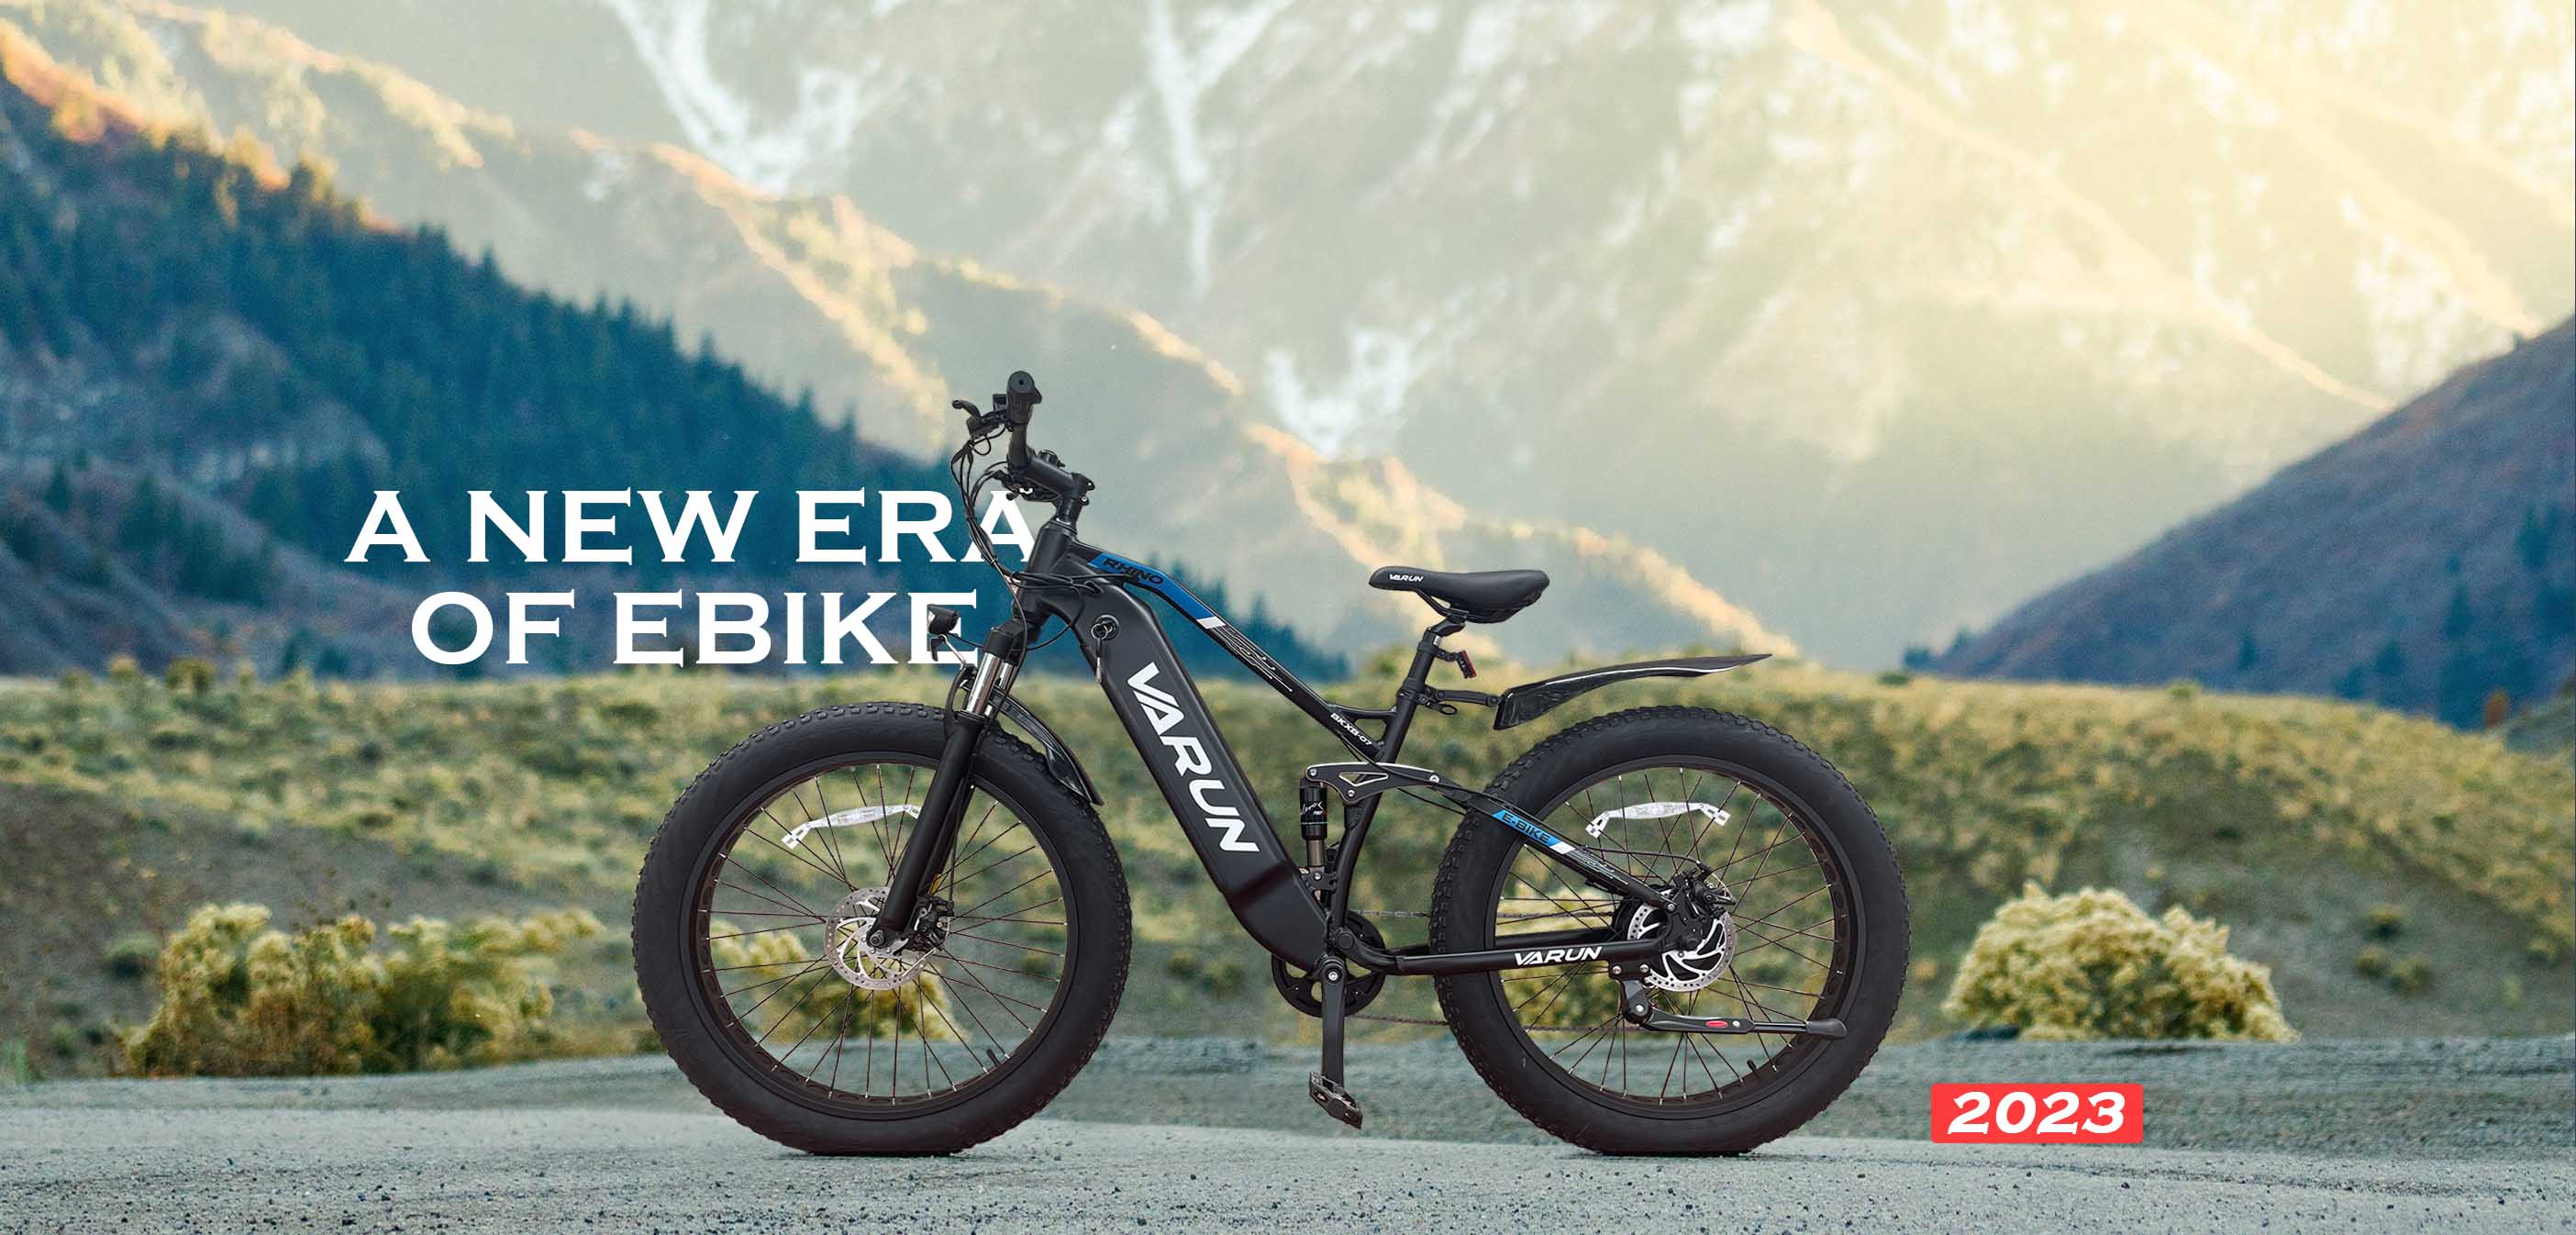 1. Why are fat tire electric bicycles gaining popularity among an increasing number of people?